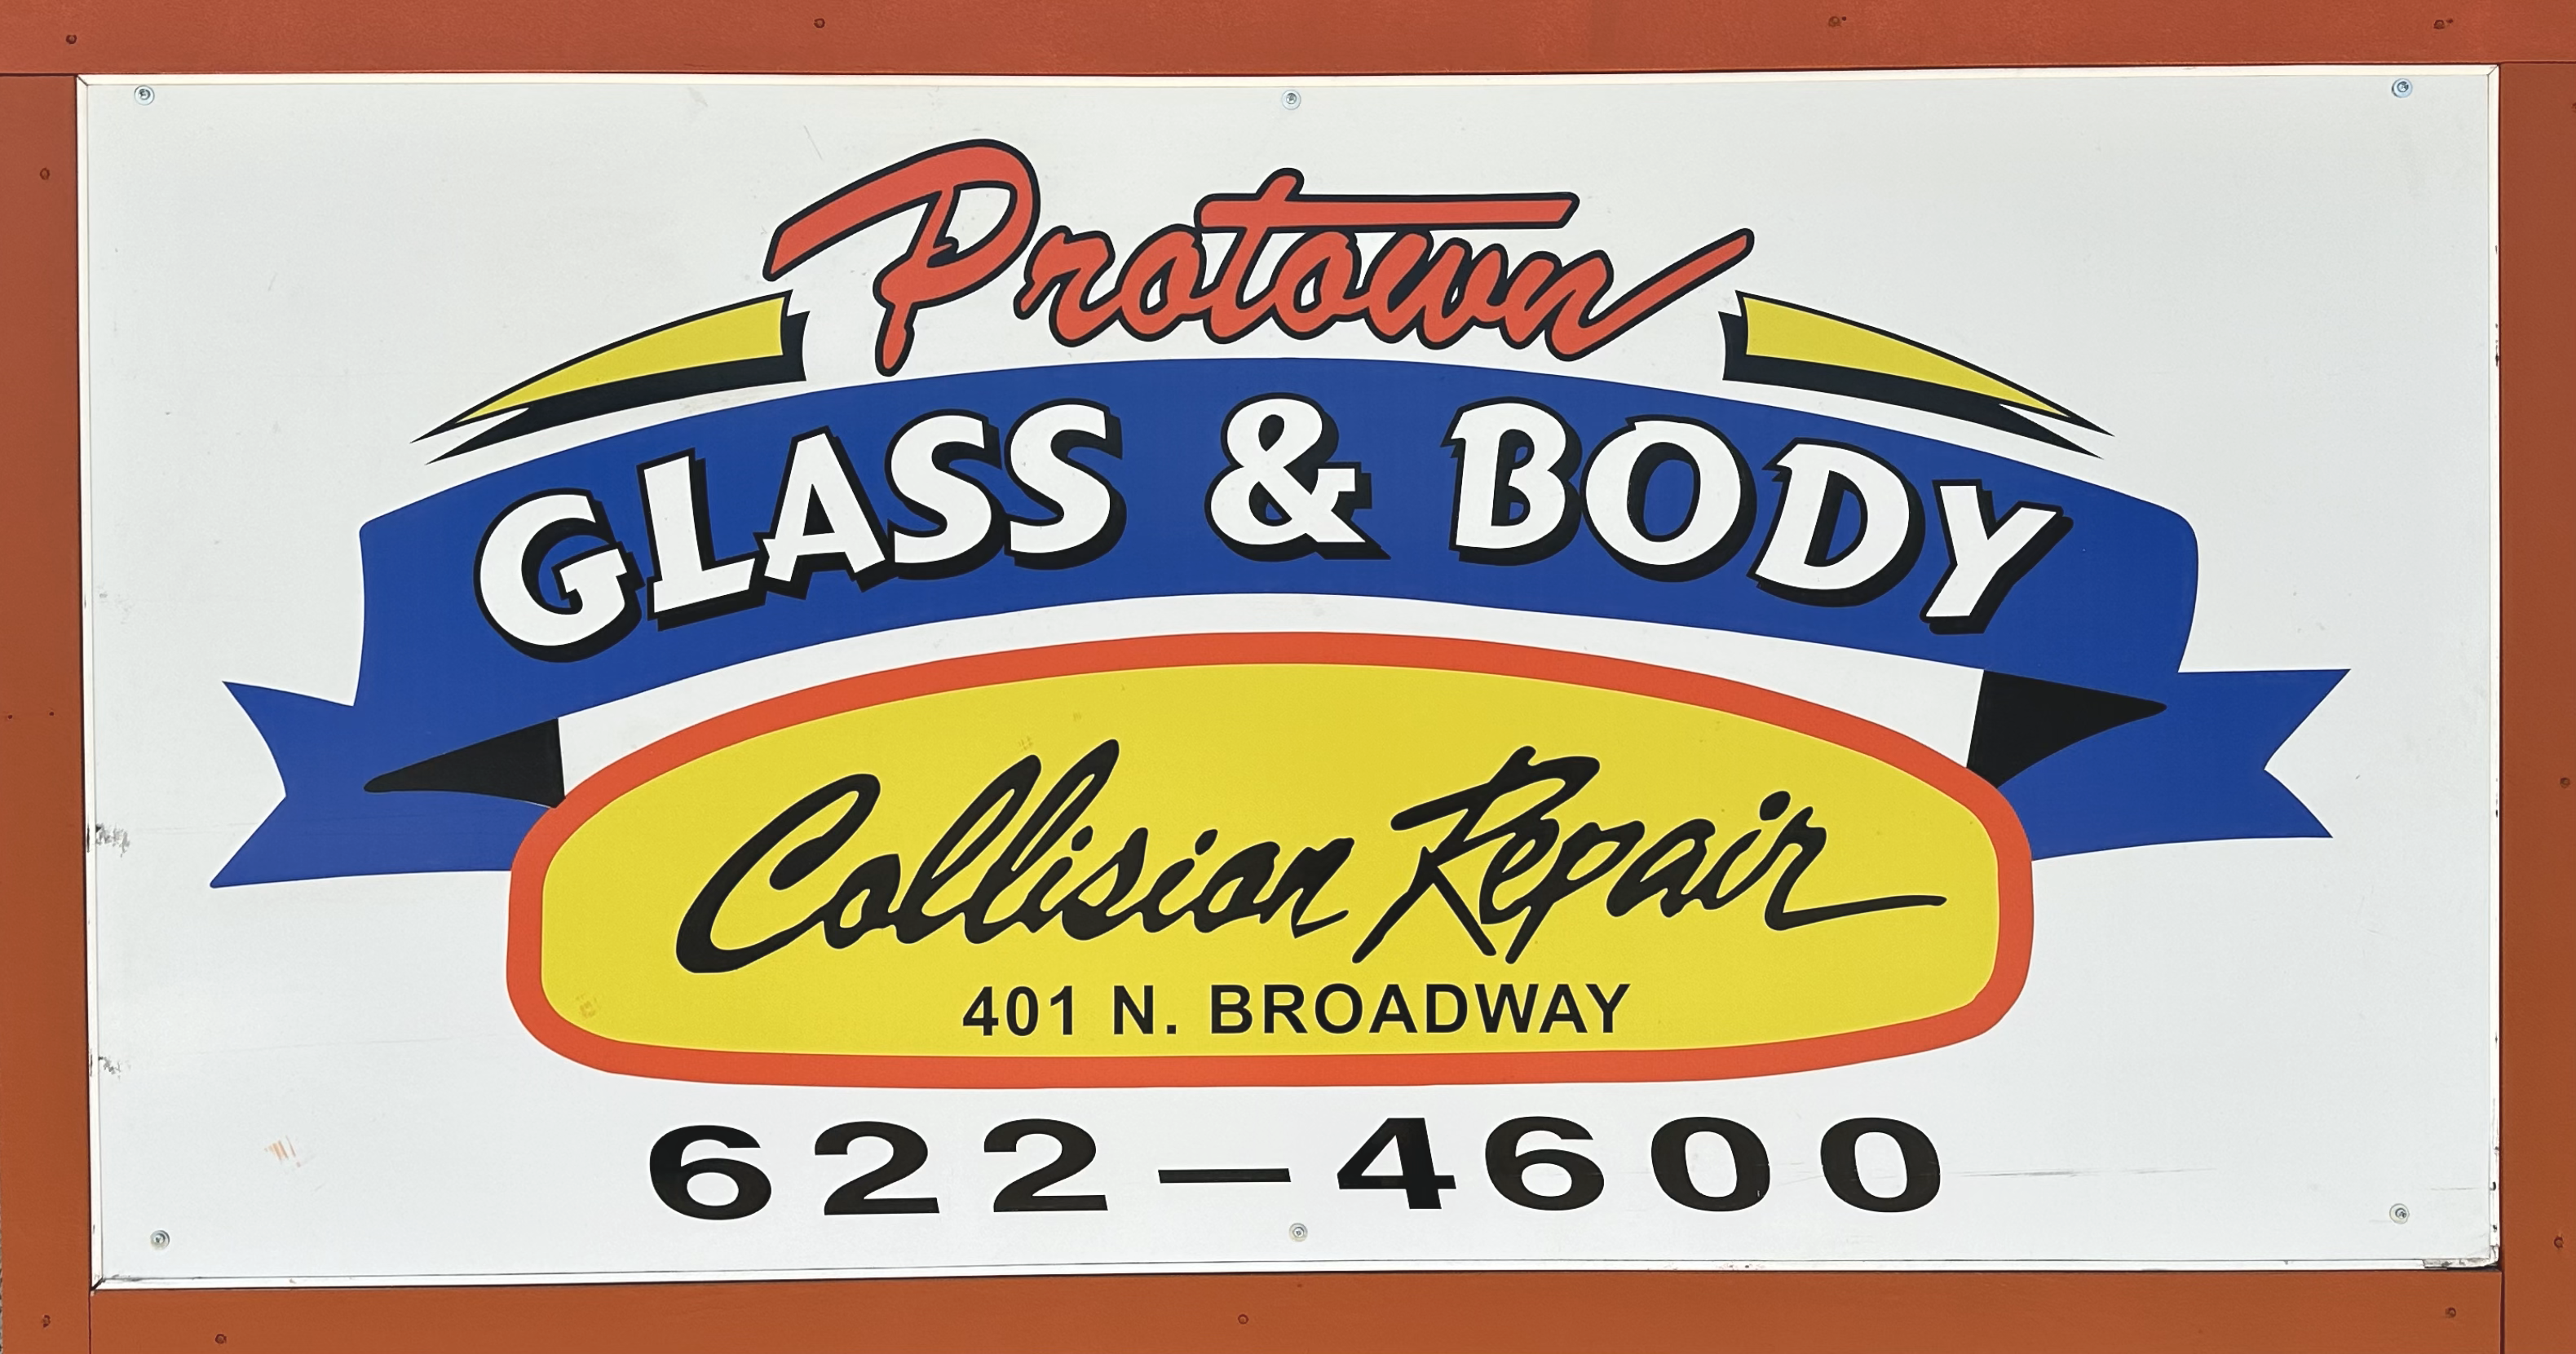 Protown Glass and Body